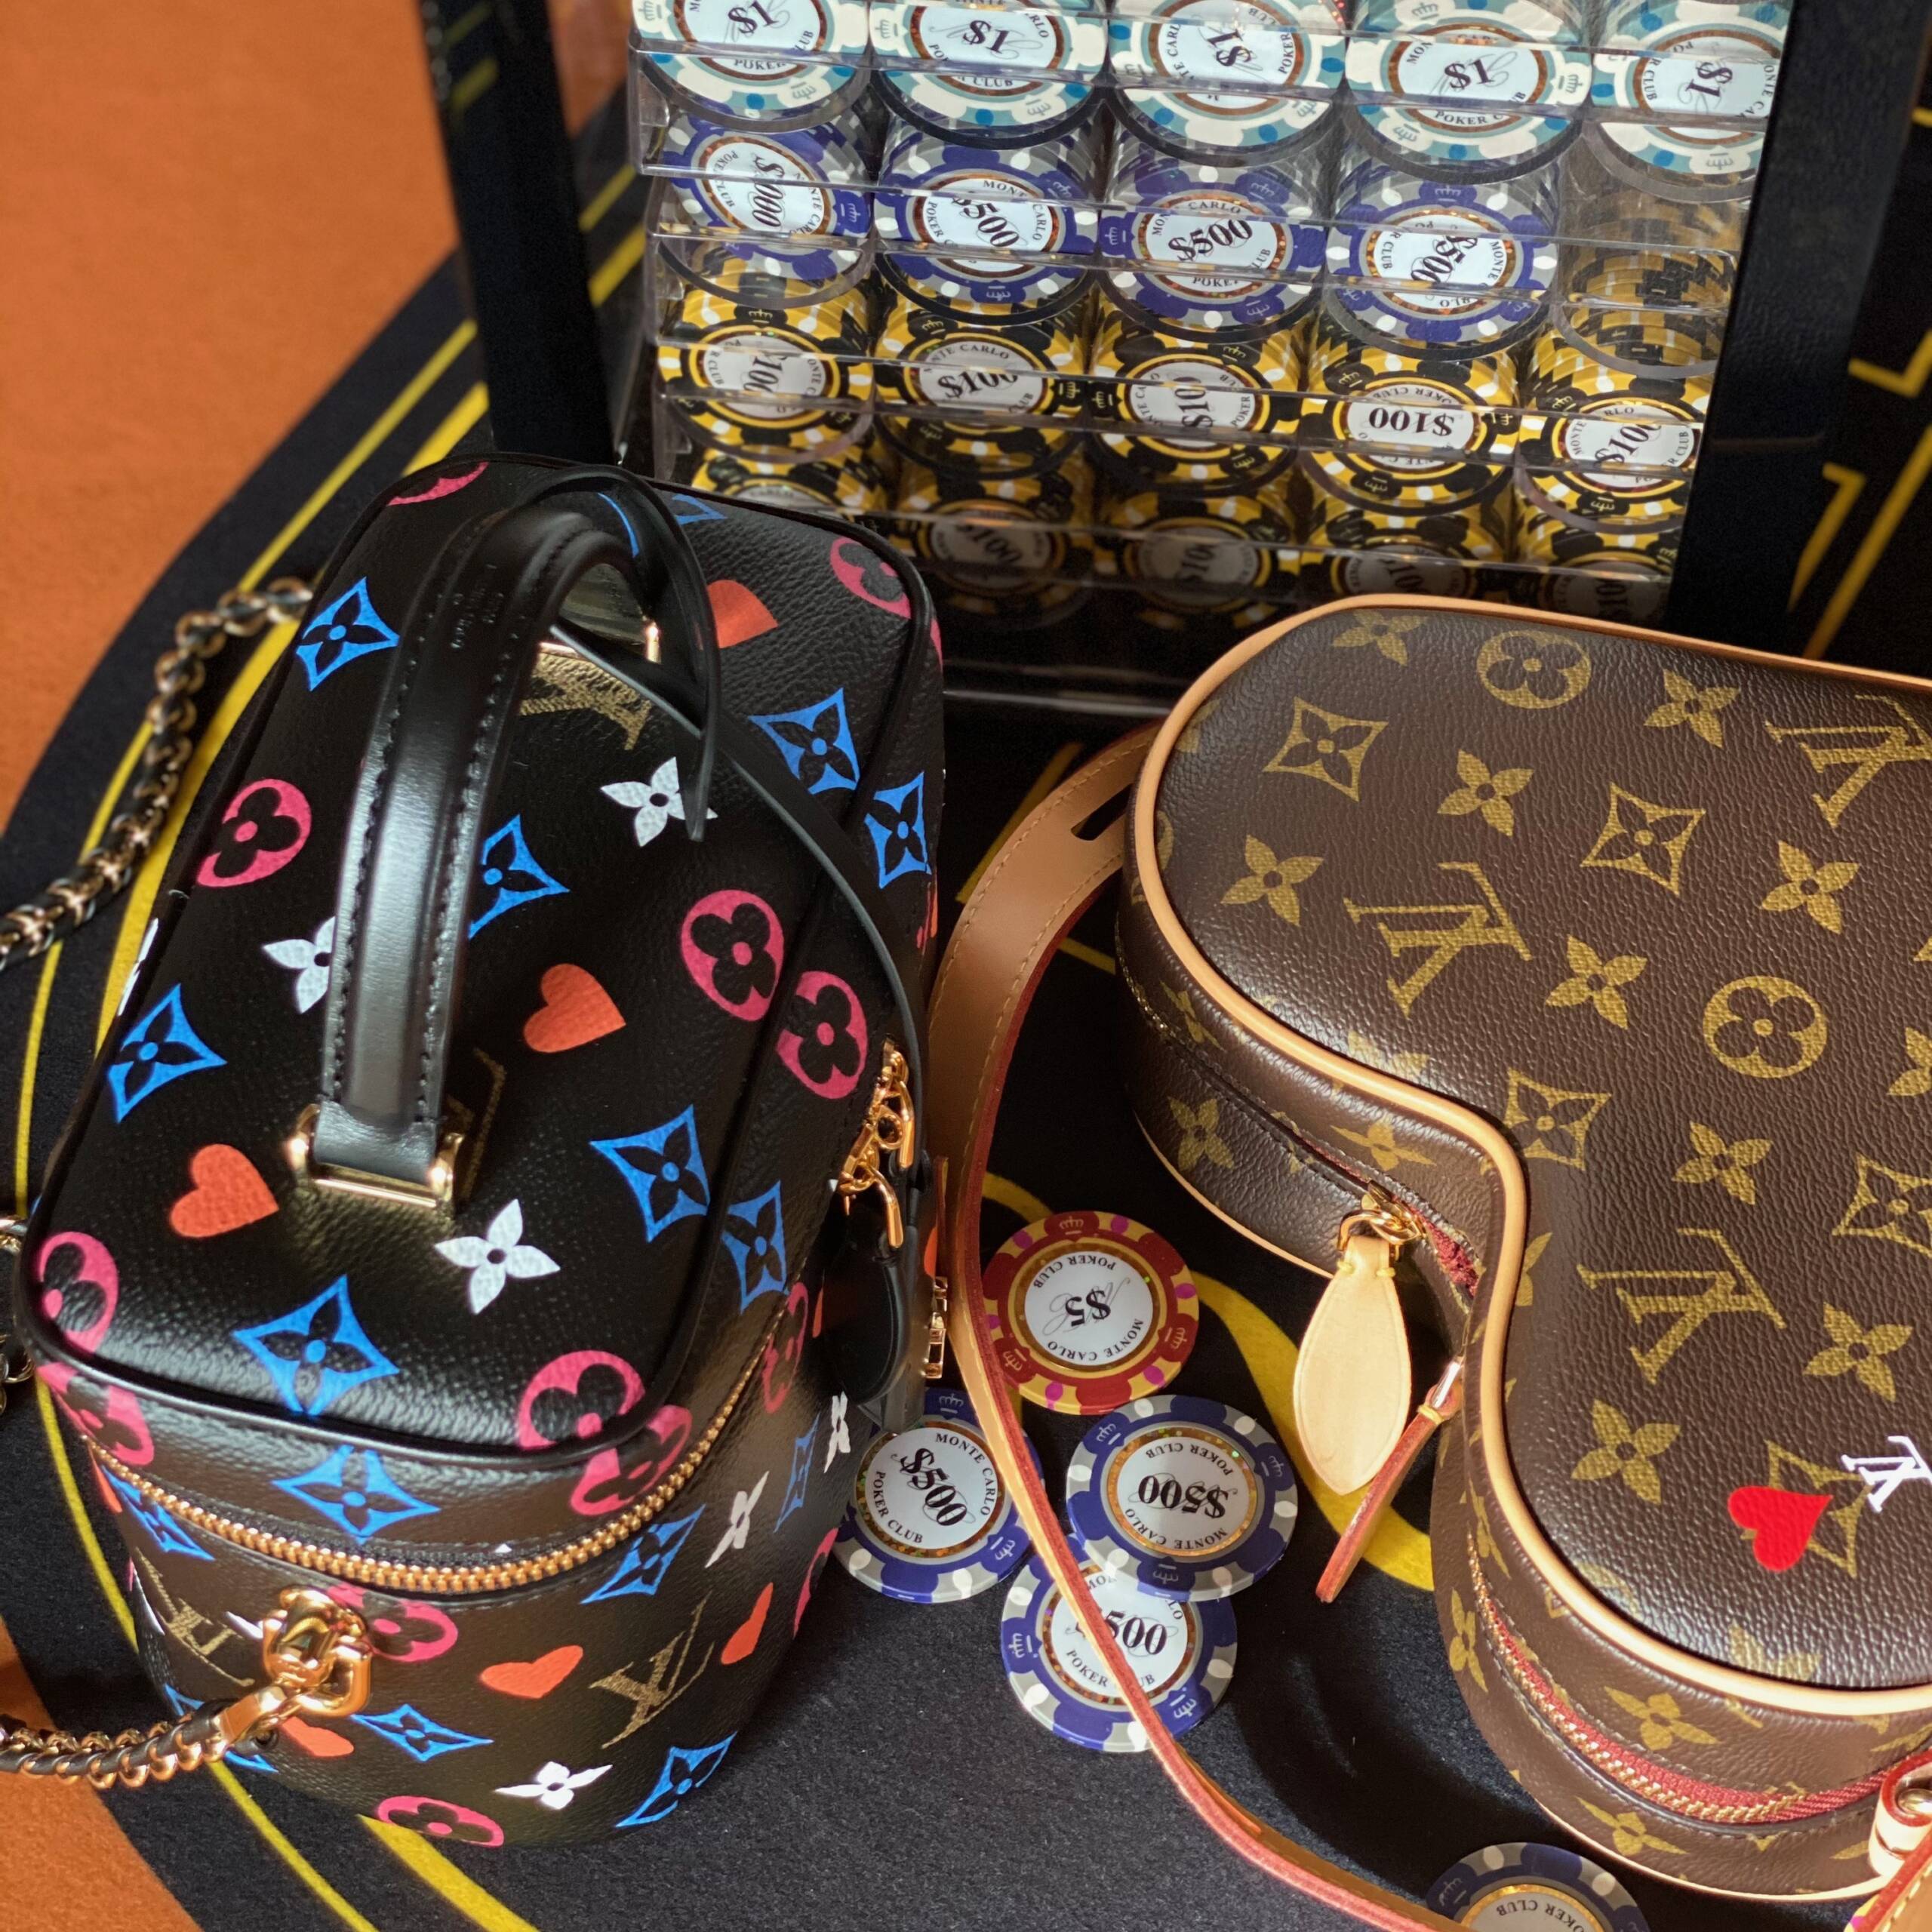 All about Louis Vuitton Vanity PM - Glam & Glitter